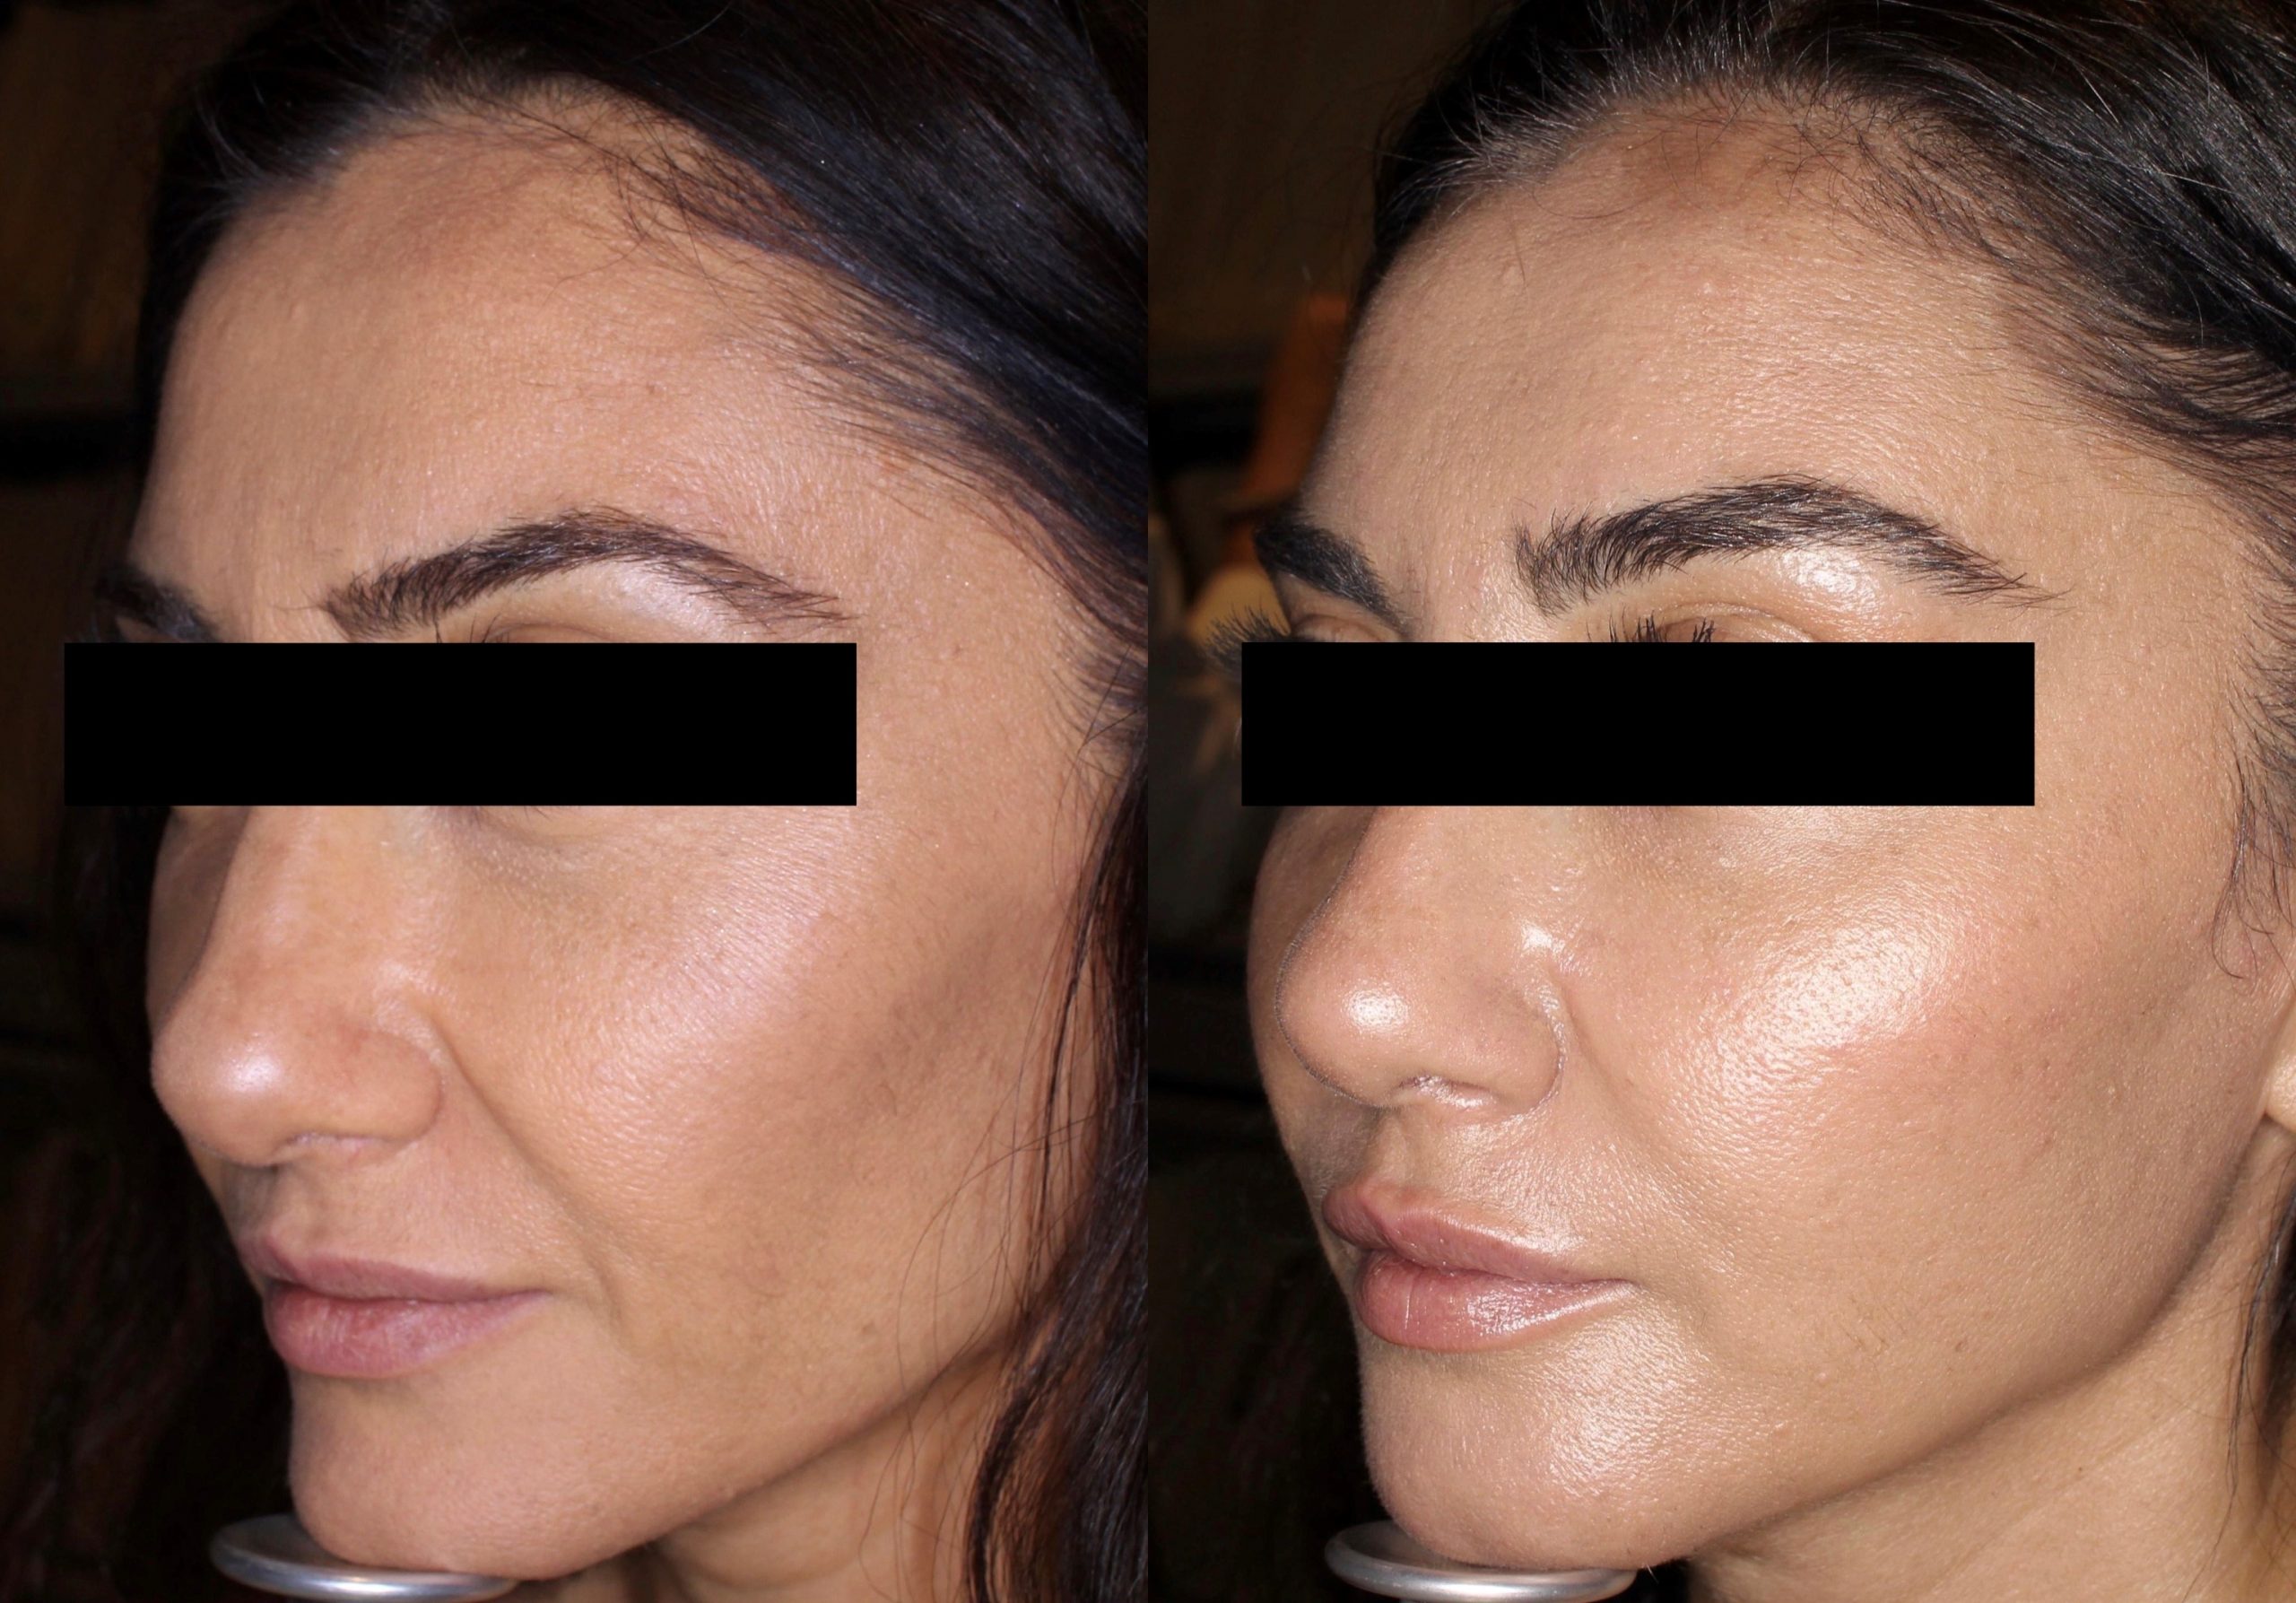 Before and after dermal filler results for a Beautech patient